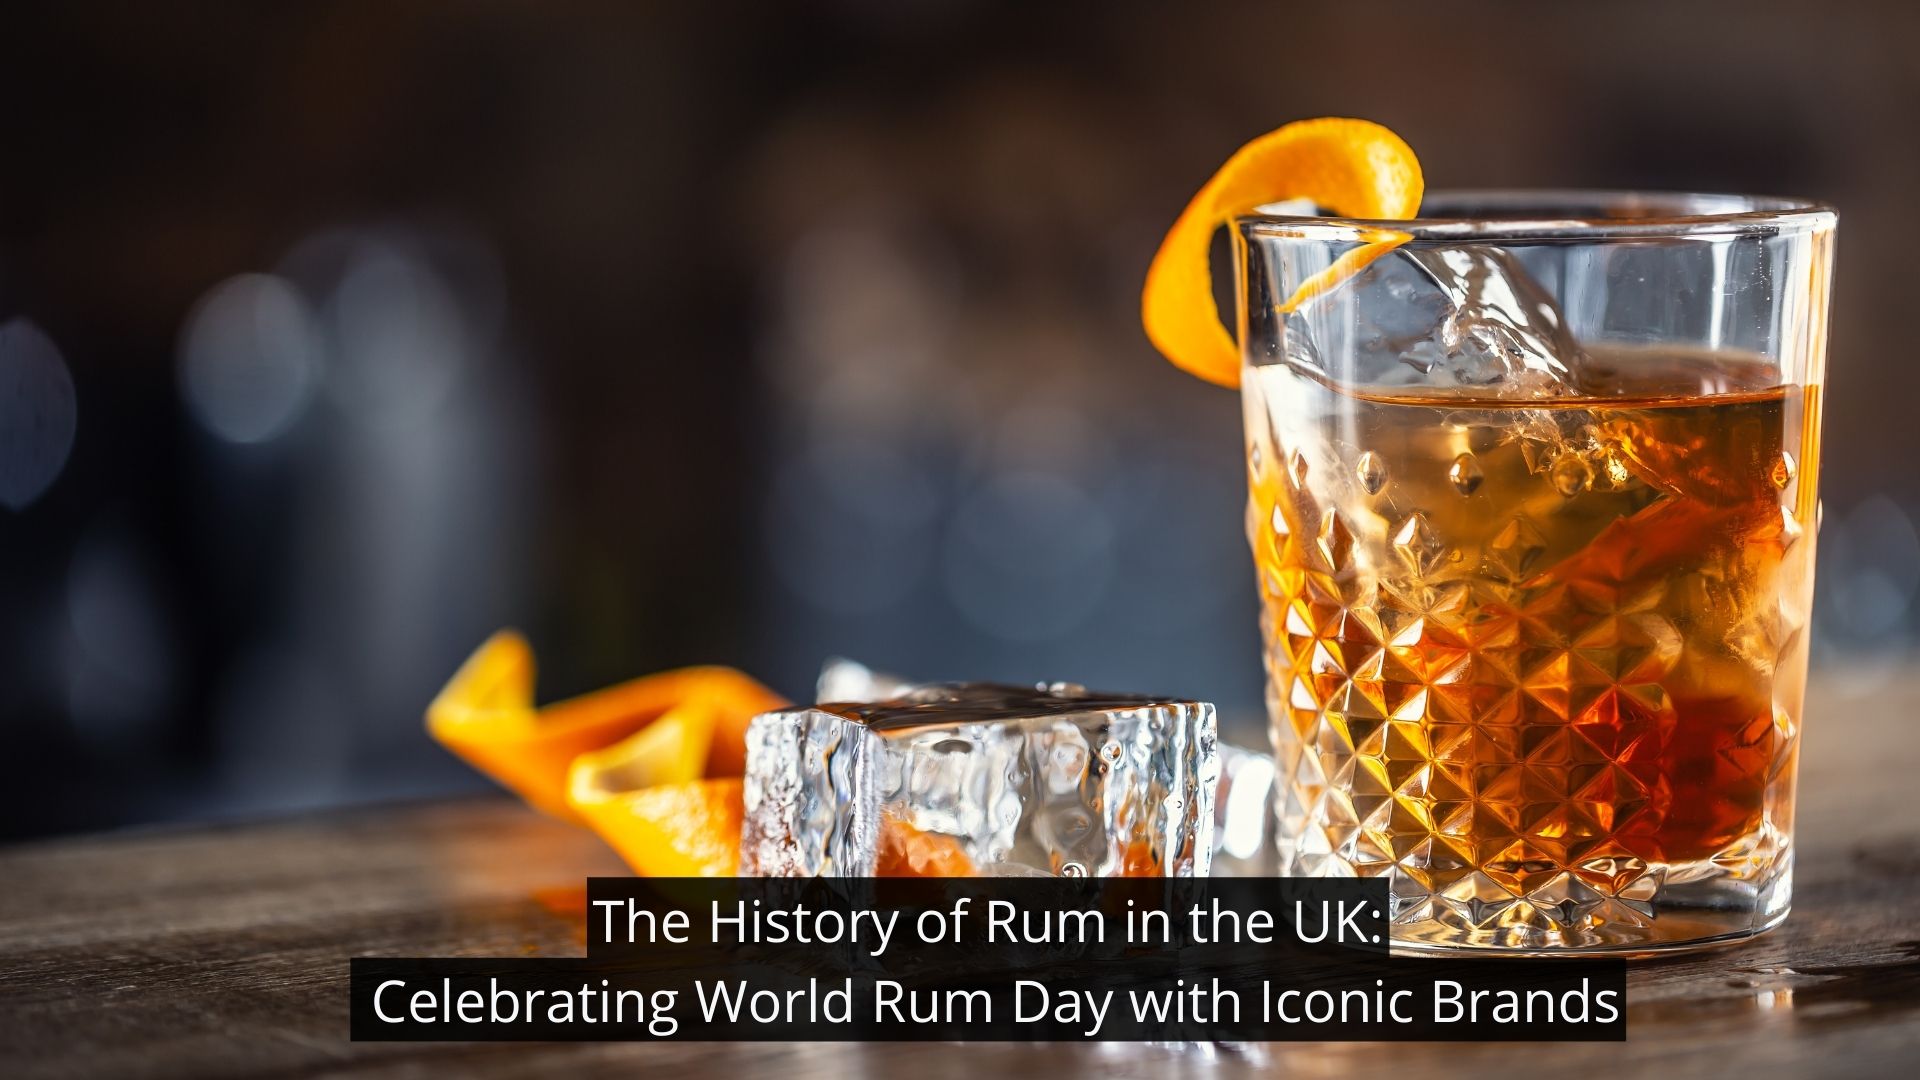 Celebrating World Rum Day with Iconic Brands